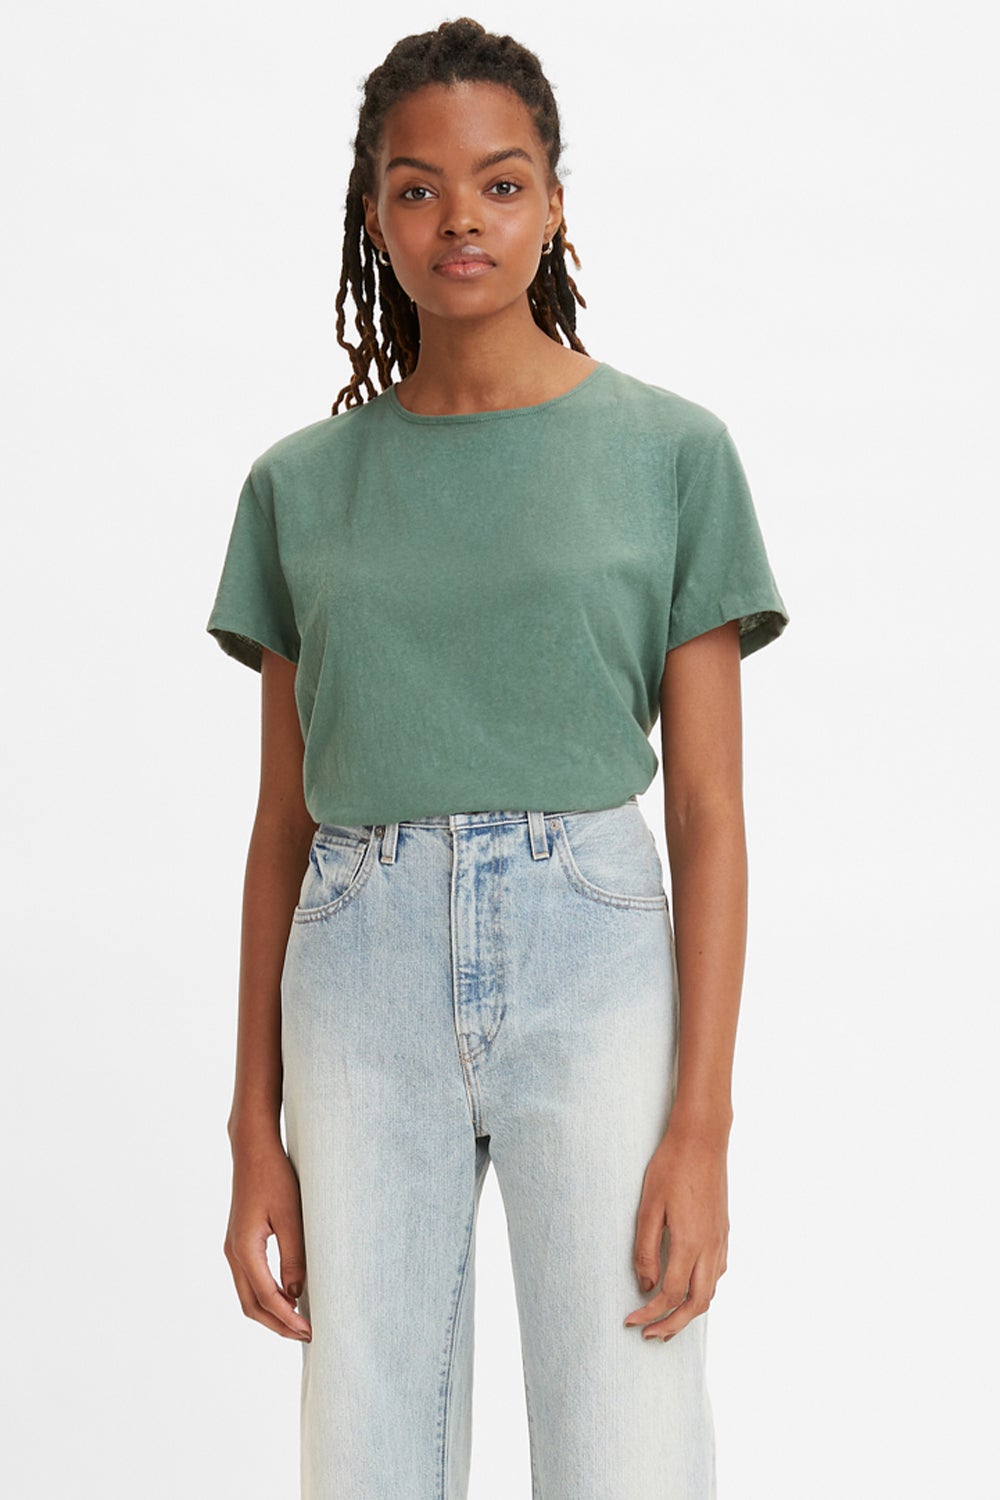 Levi's Made and Crafted Open Neck Tee Silver Pine